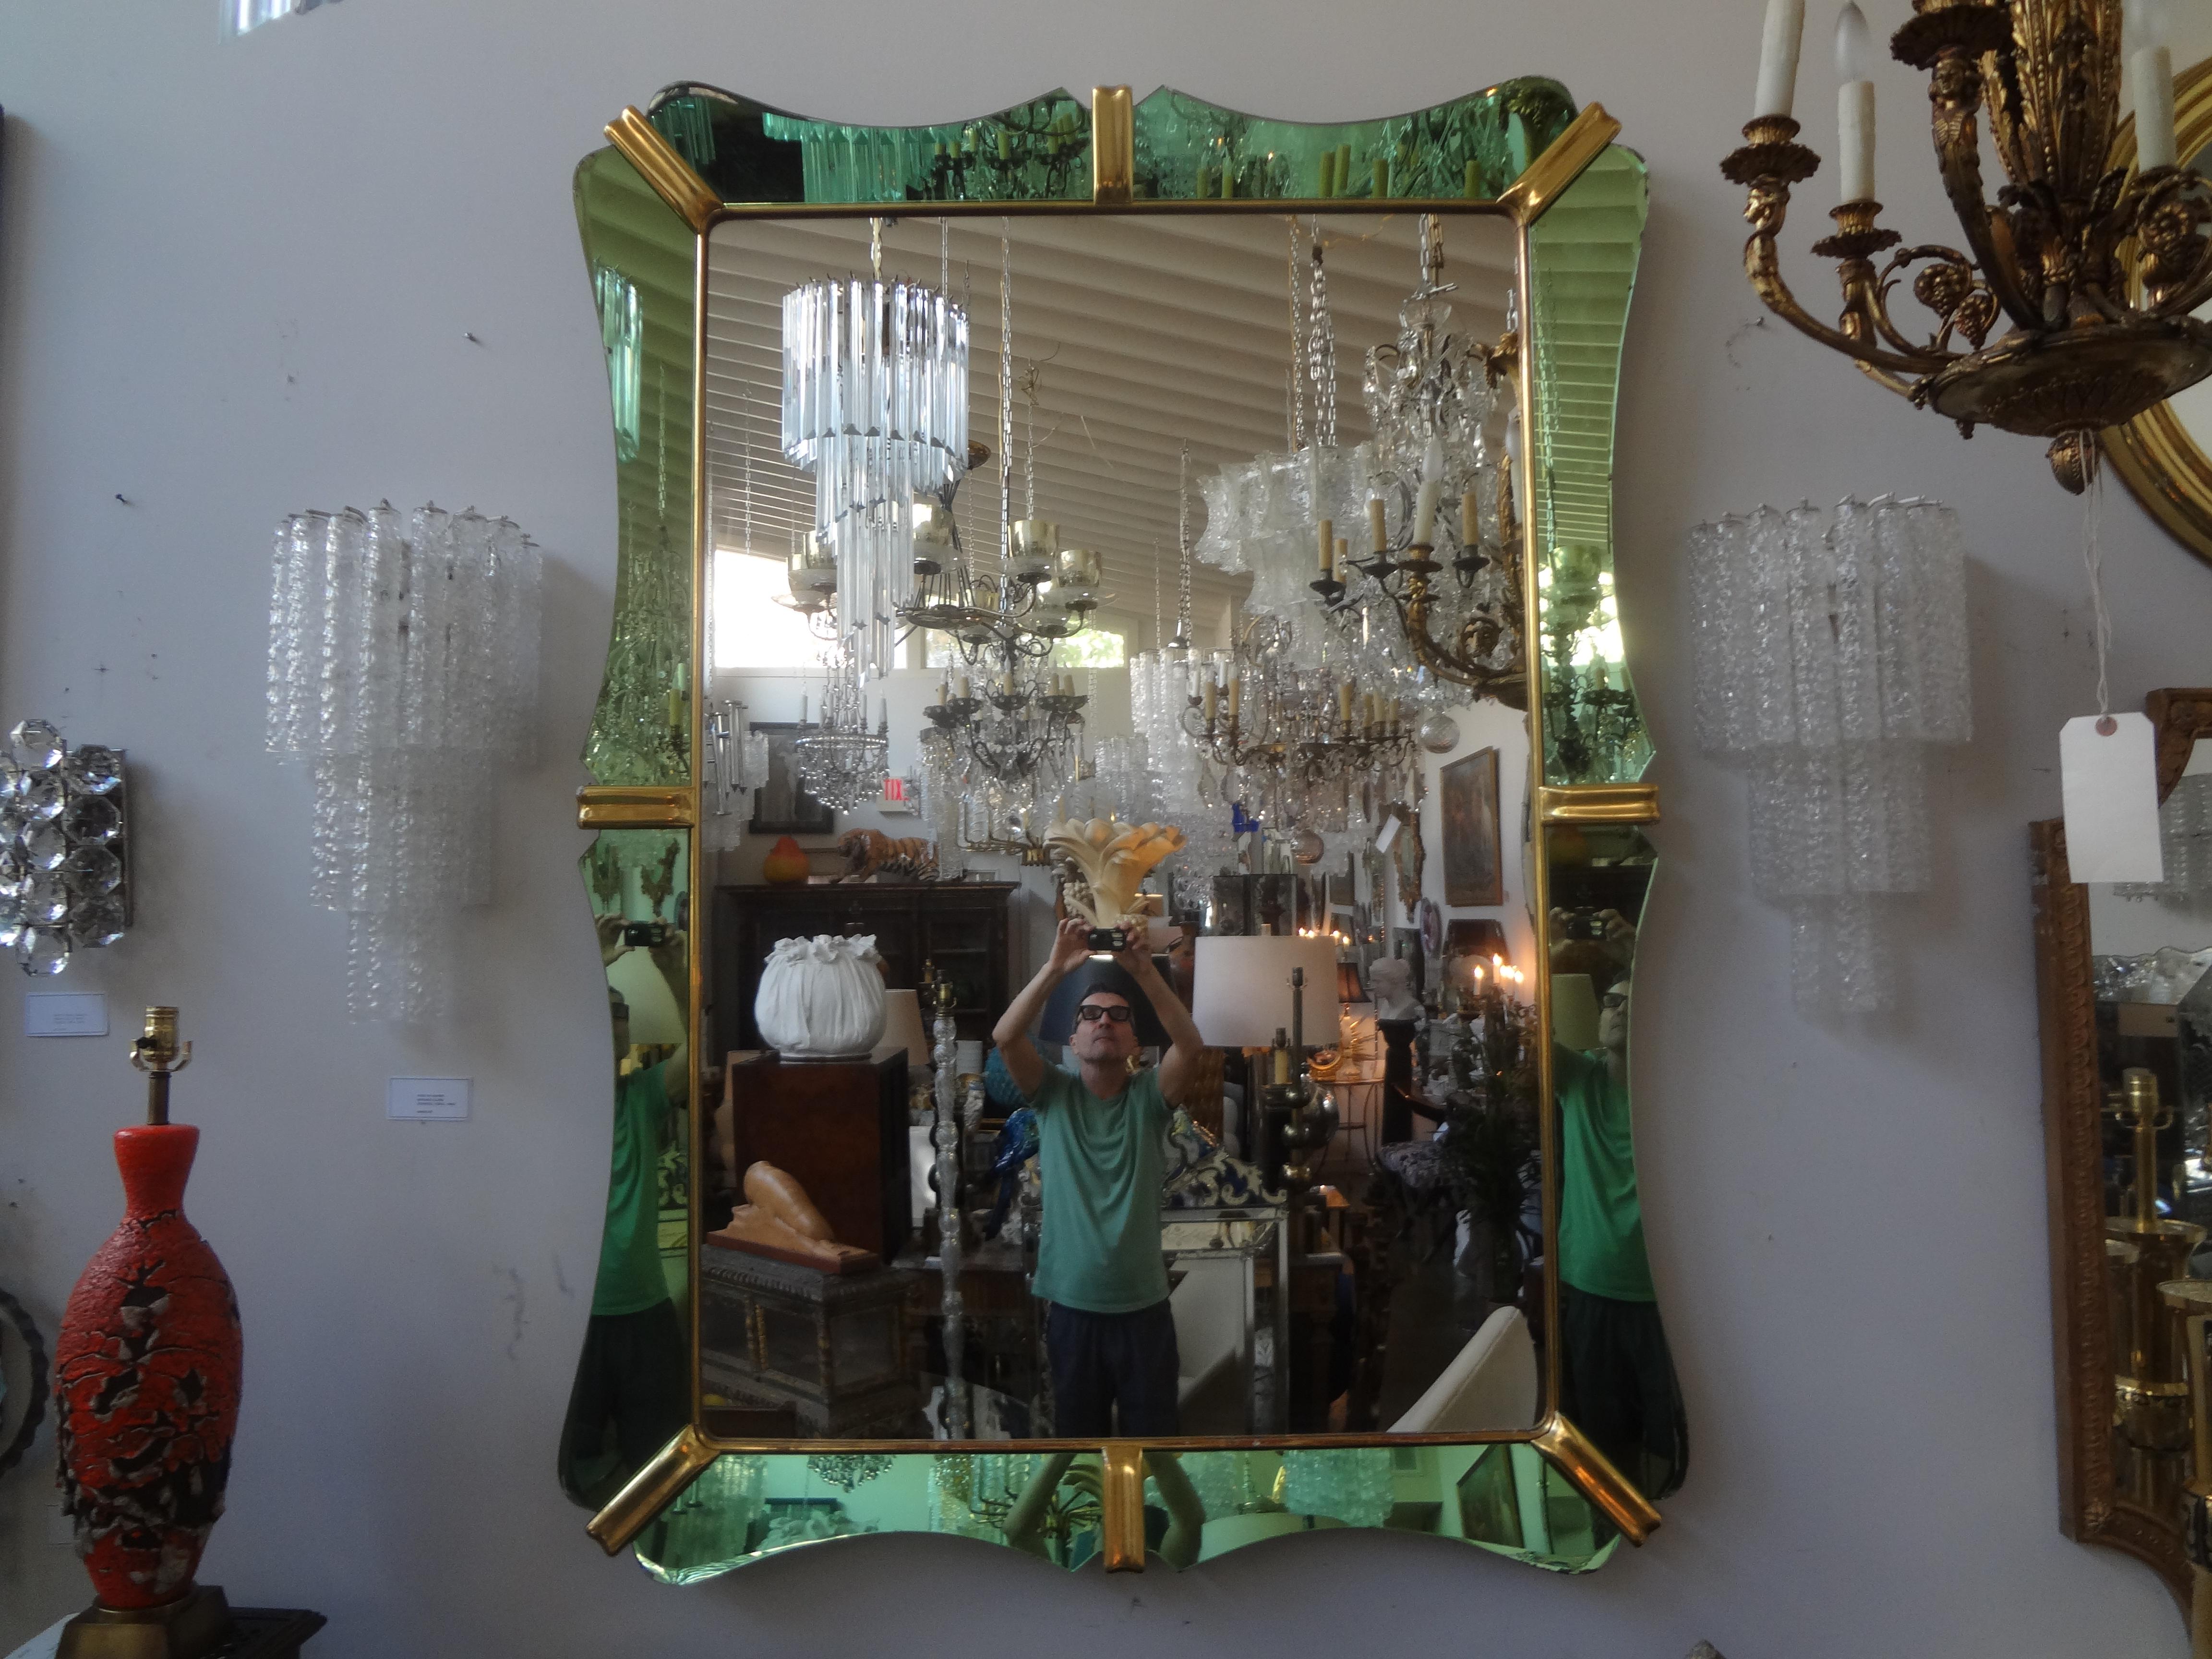 Italian Pietro Chiesa for Fontana Arte Attributed mirror.
This monumental Italian mirror with most unusual green glass perimeter trimmed in giltwood accents.
Our stunning Italian Art Deco mirror can be displayed horizontally or vertically.